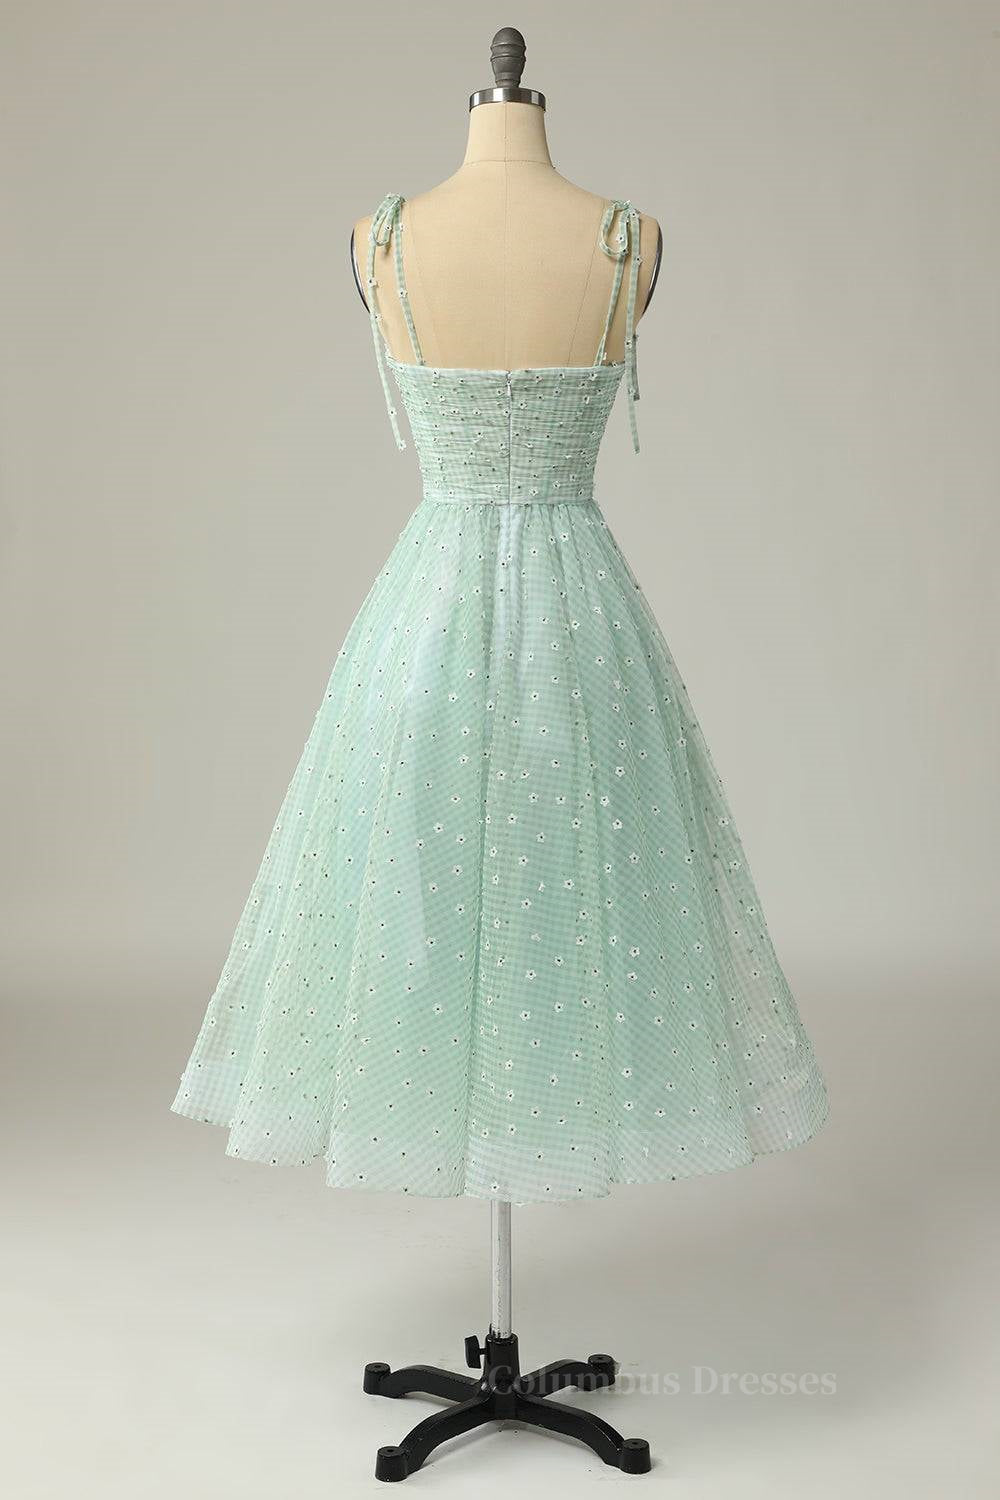 Bridesmaids Dresses Vintage, Agave A-line Tie Bow Straps Applique Pleated Mini Homecoming Dress